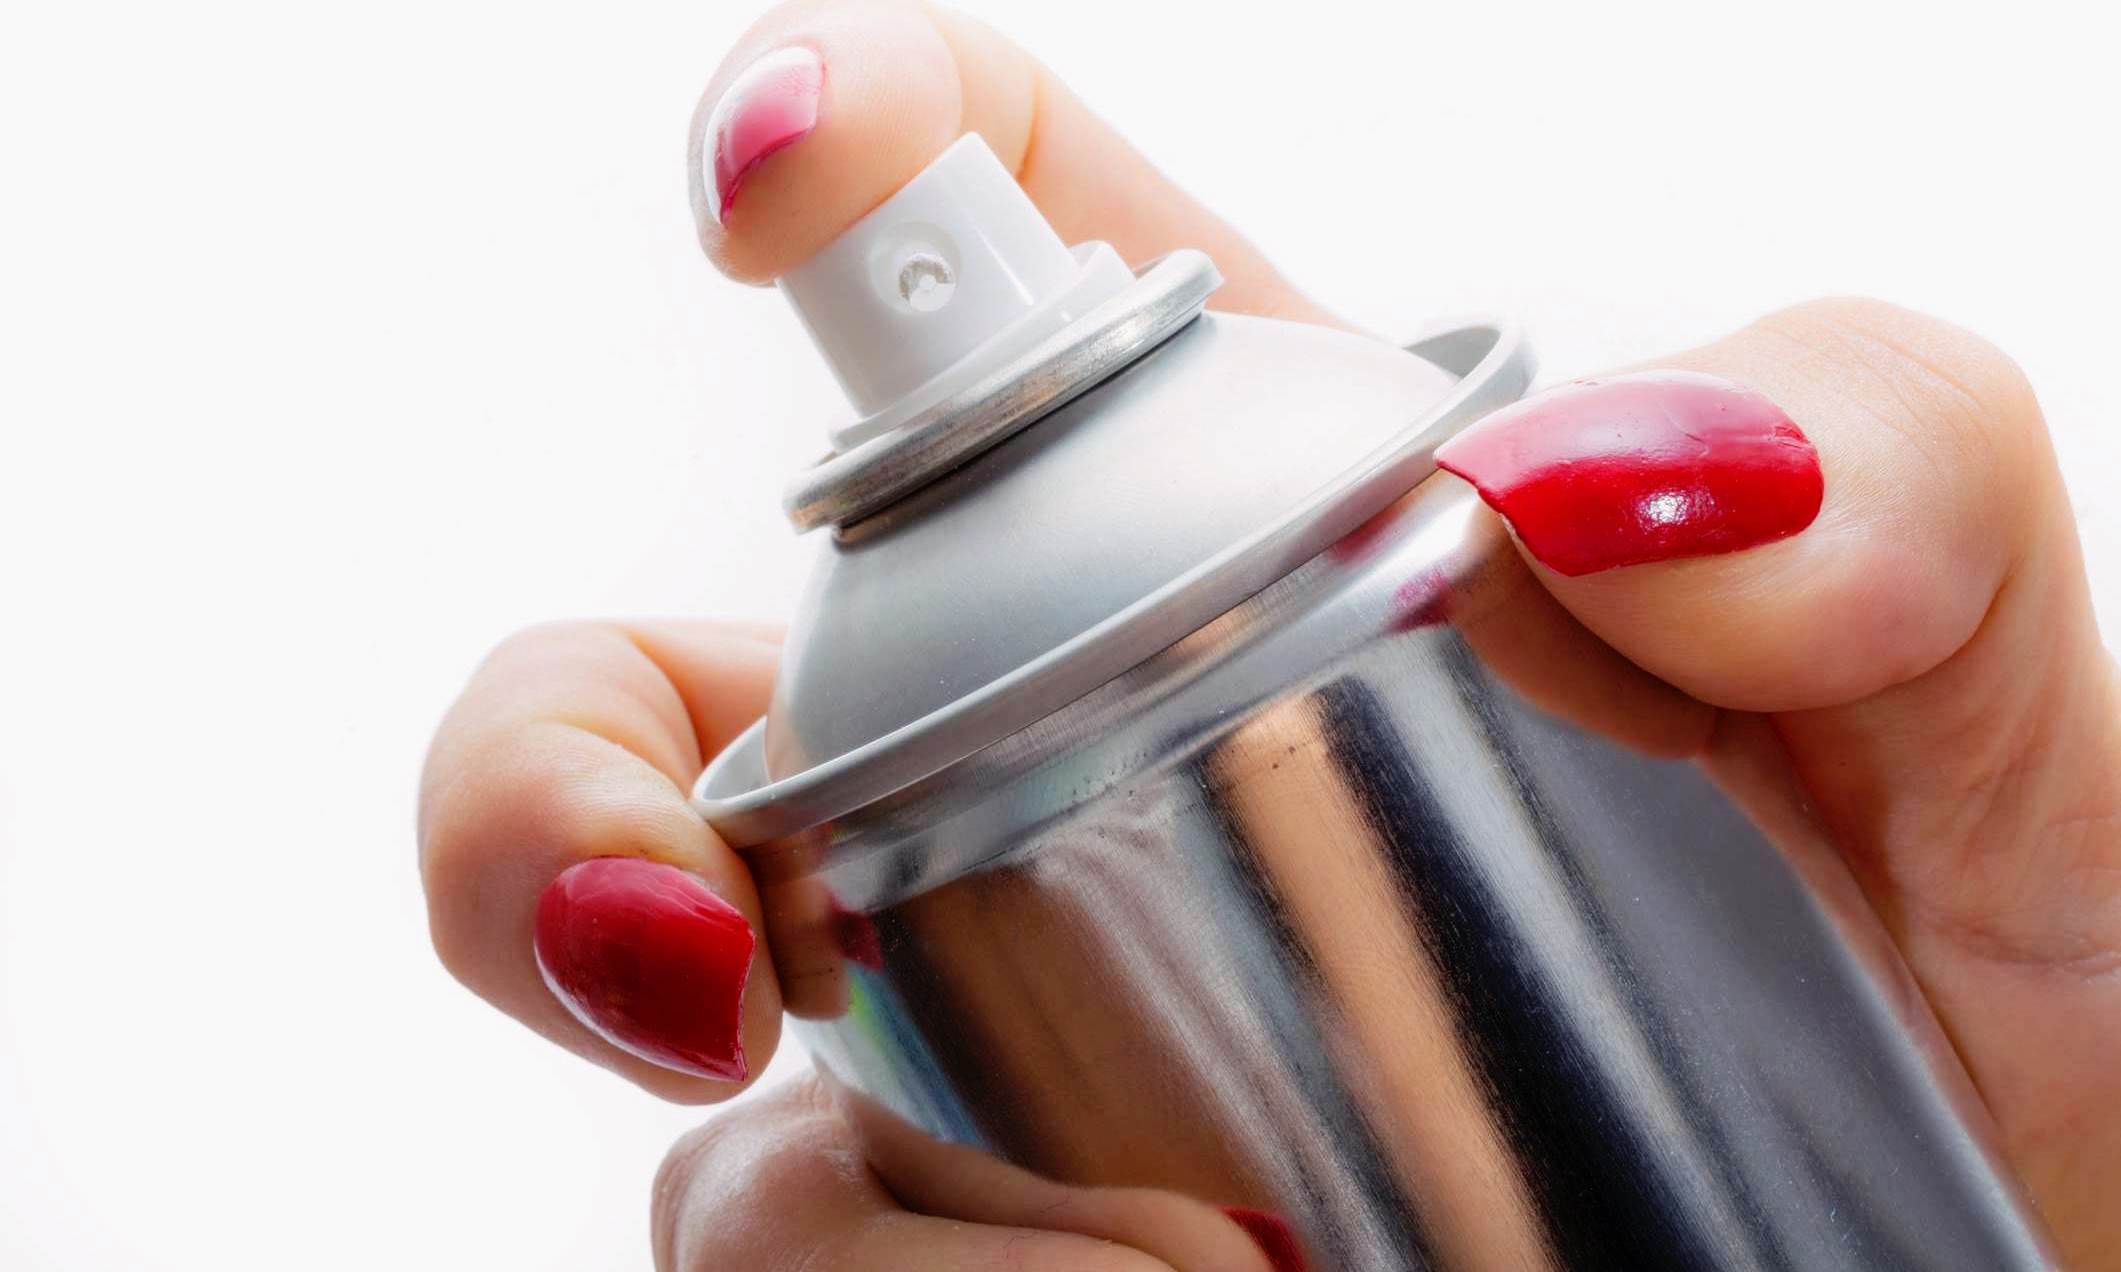 Is Hairspray Really The Fastest Trick To Dry Nail Polish?